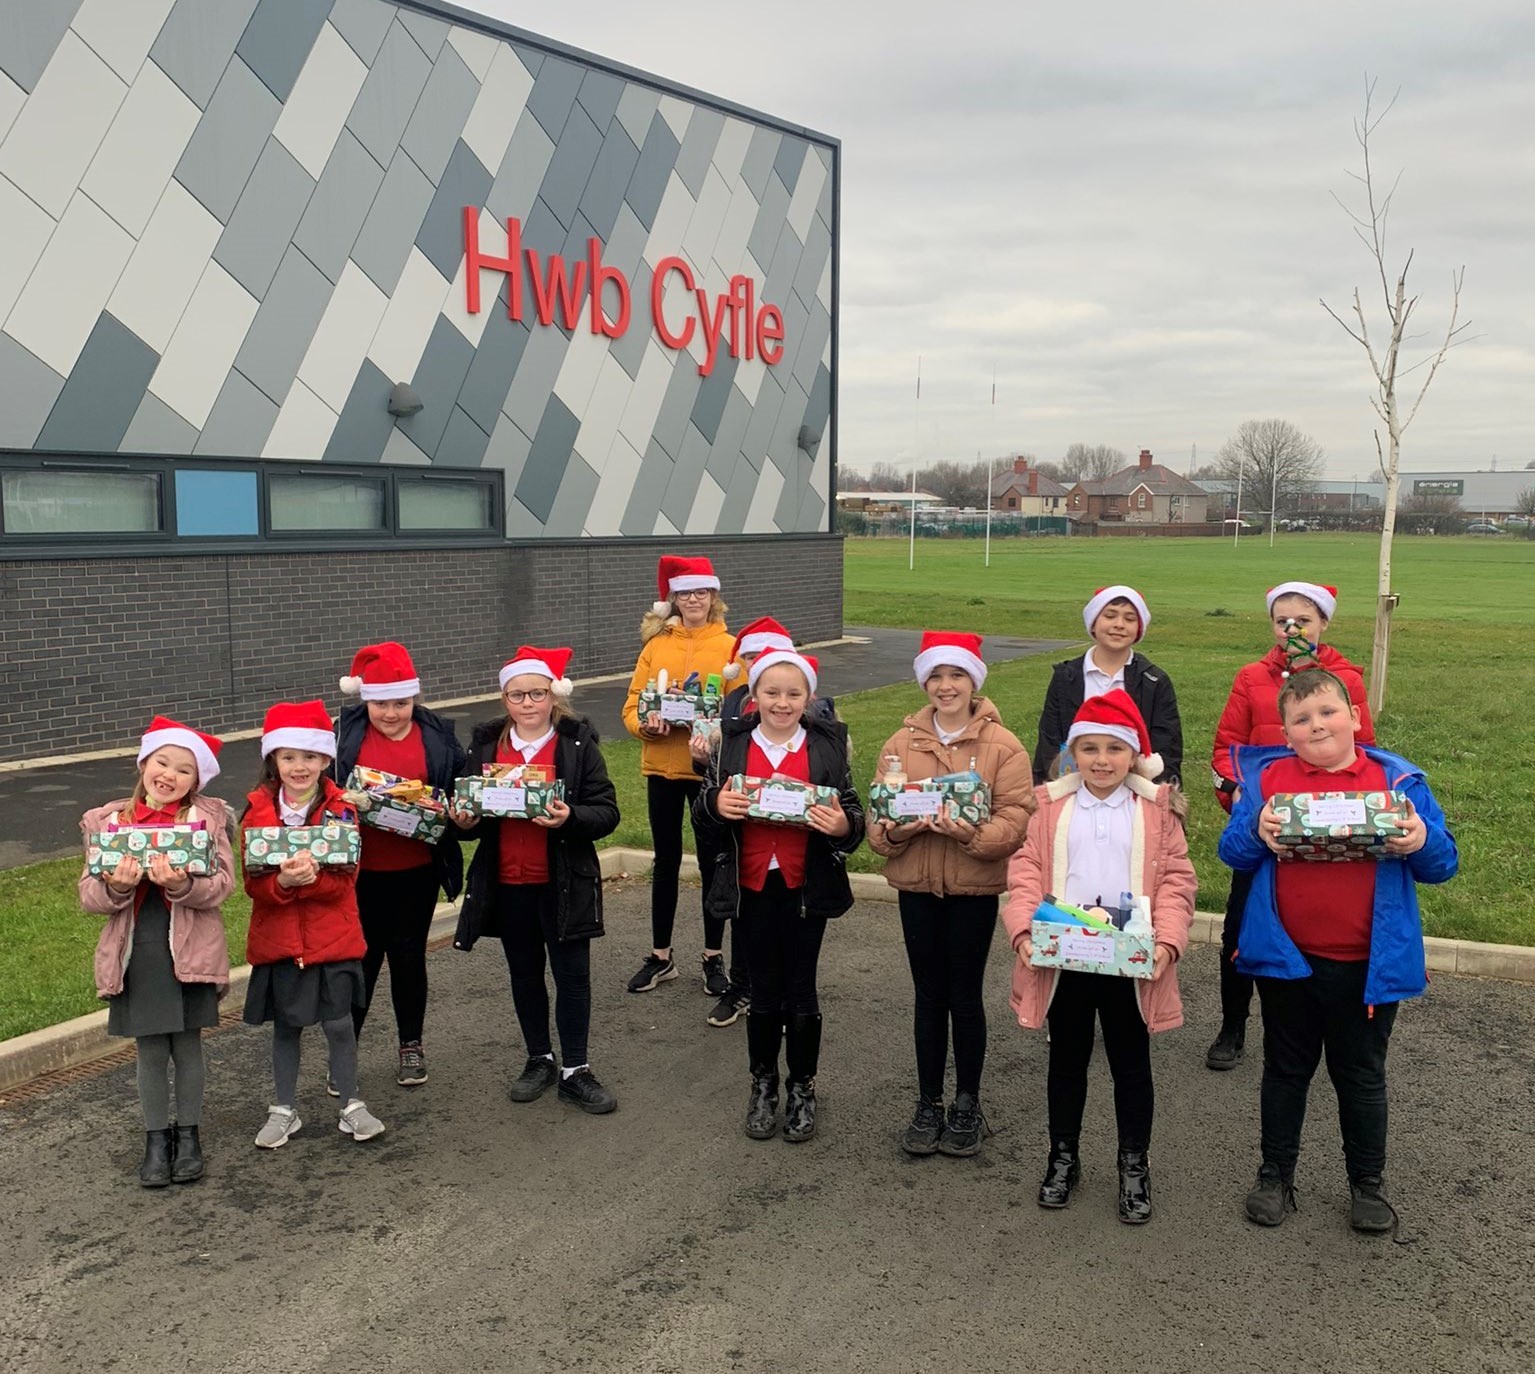 Pupils from Queensferry CP School collected, made and delivered hampers to deserving people in their community over Christmas.